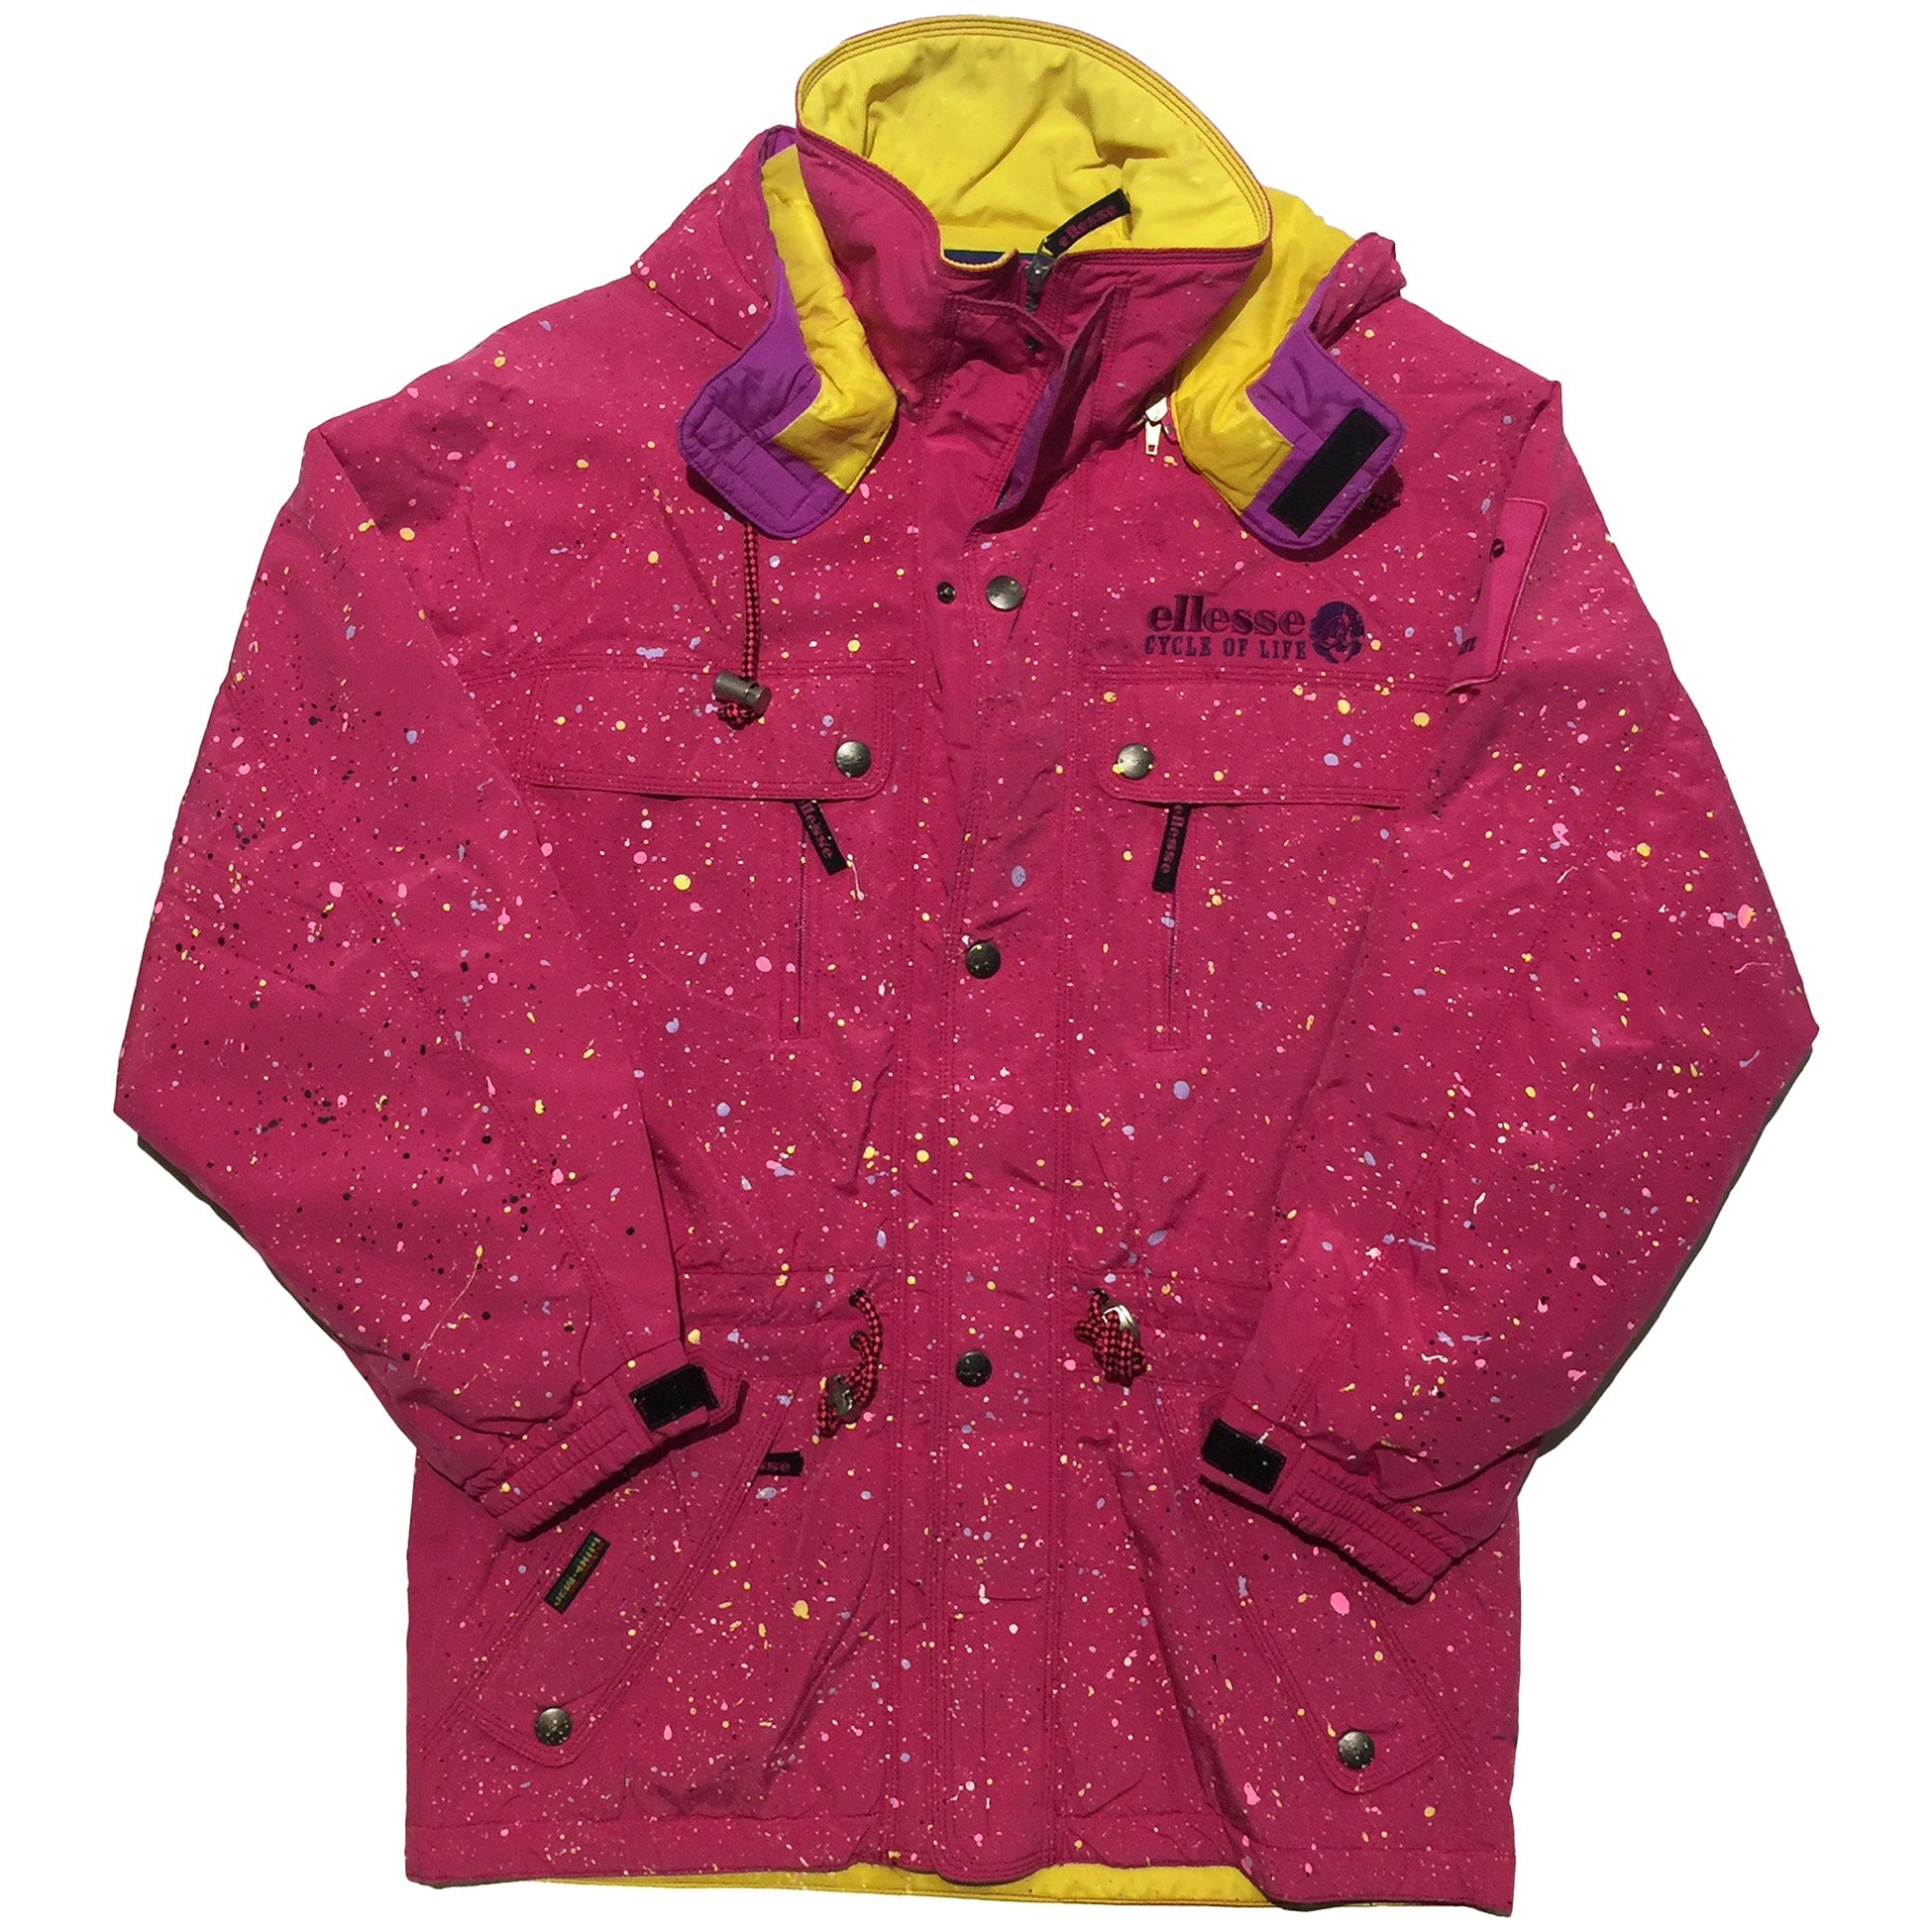 Ellesse Hand Splattered Pink and Yellow Jacket